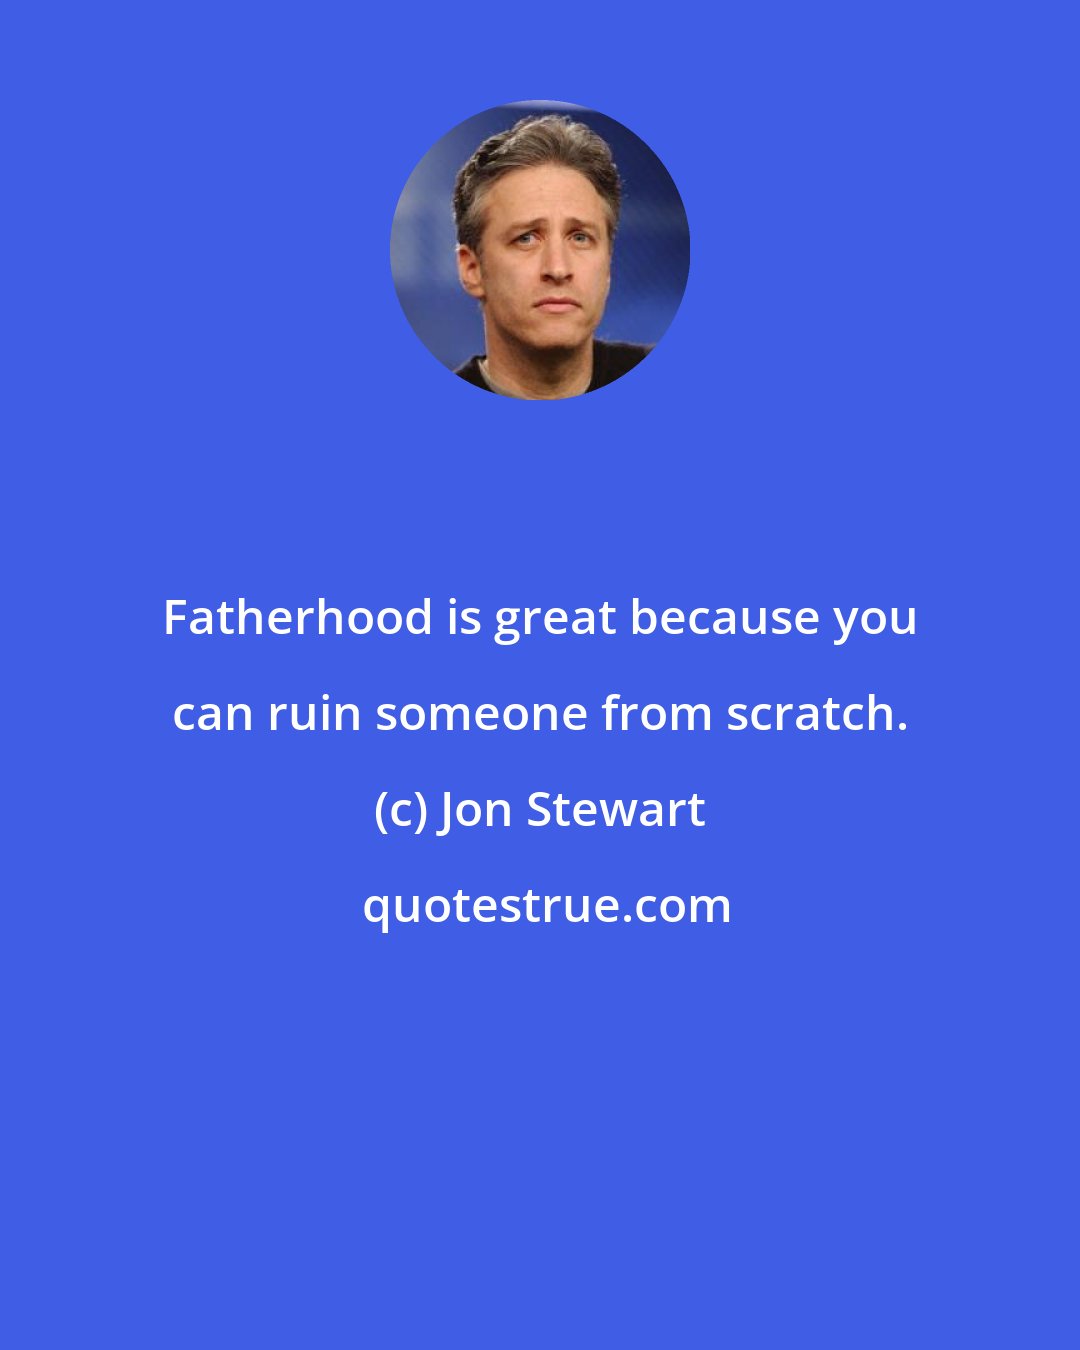 Jon Stewart: Fatherhood is great because you can ruin someone from scratch.